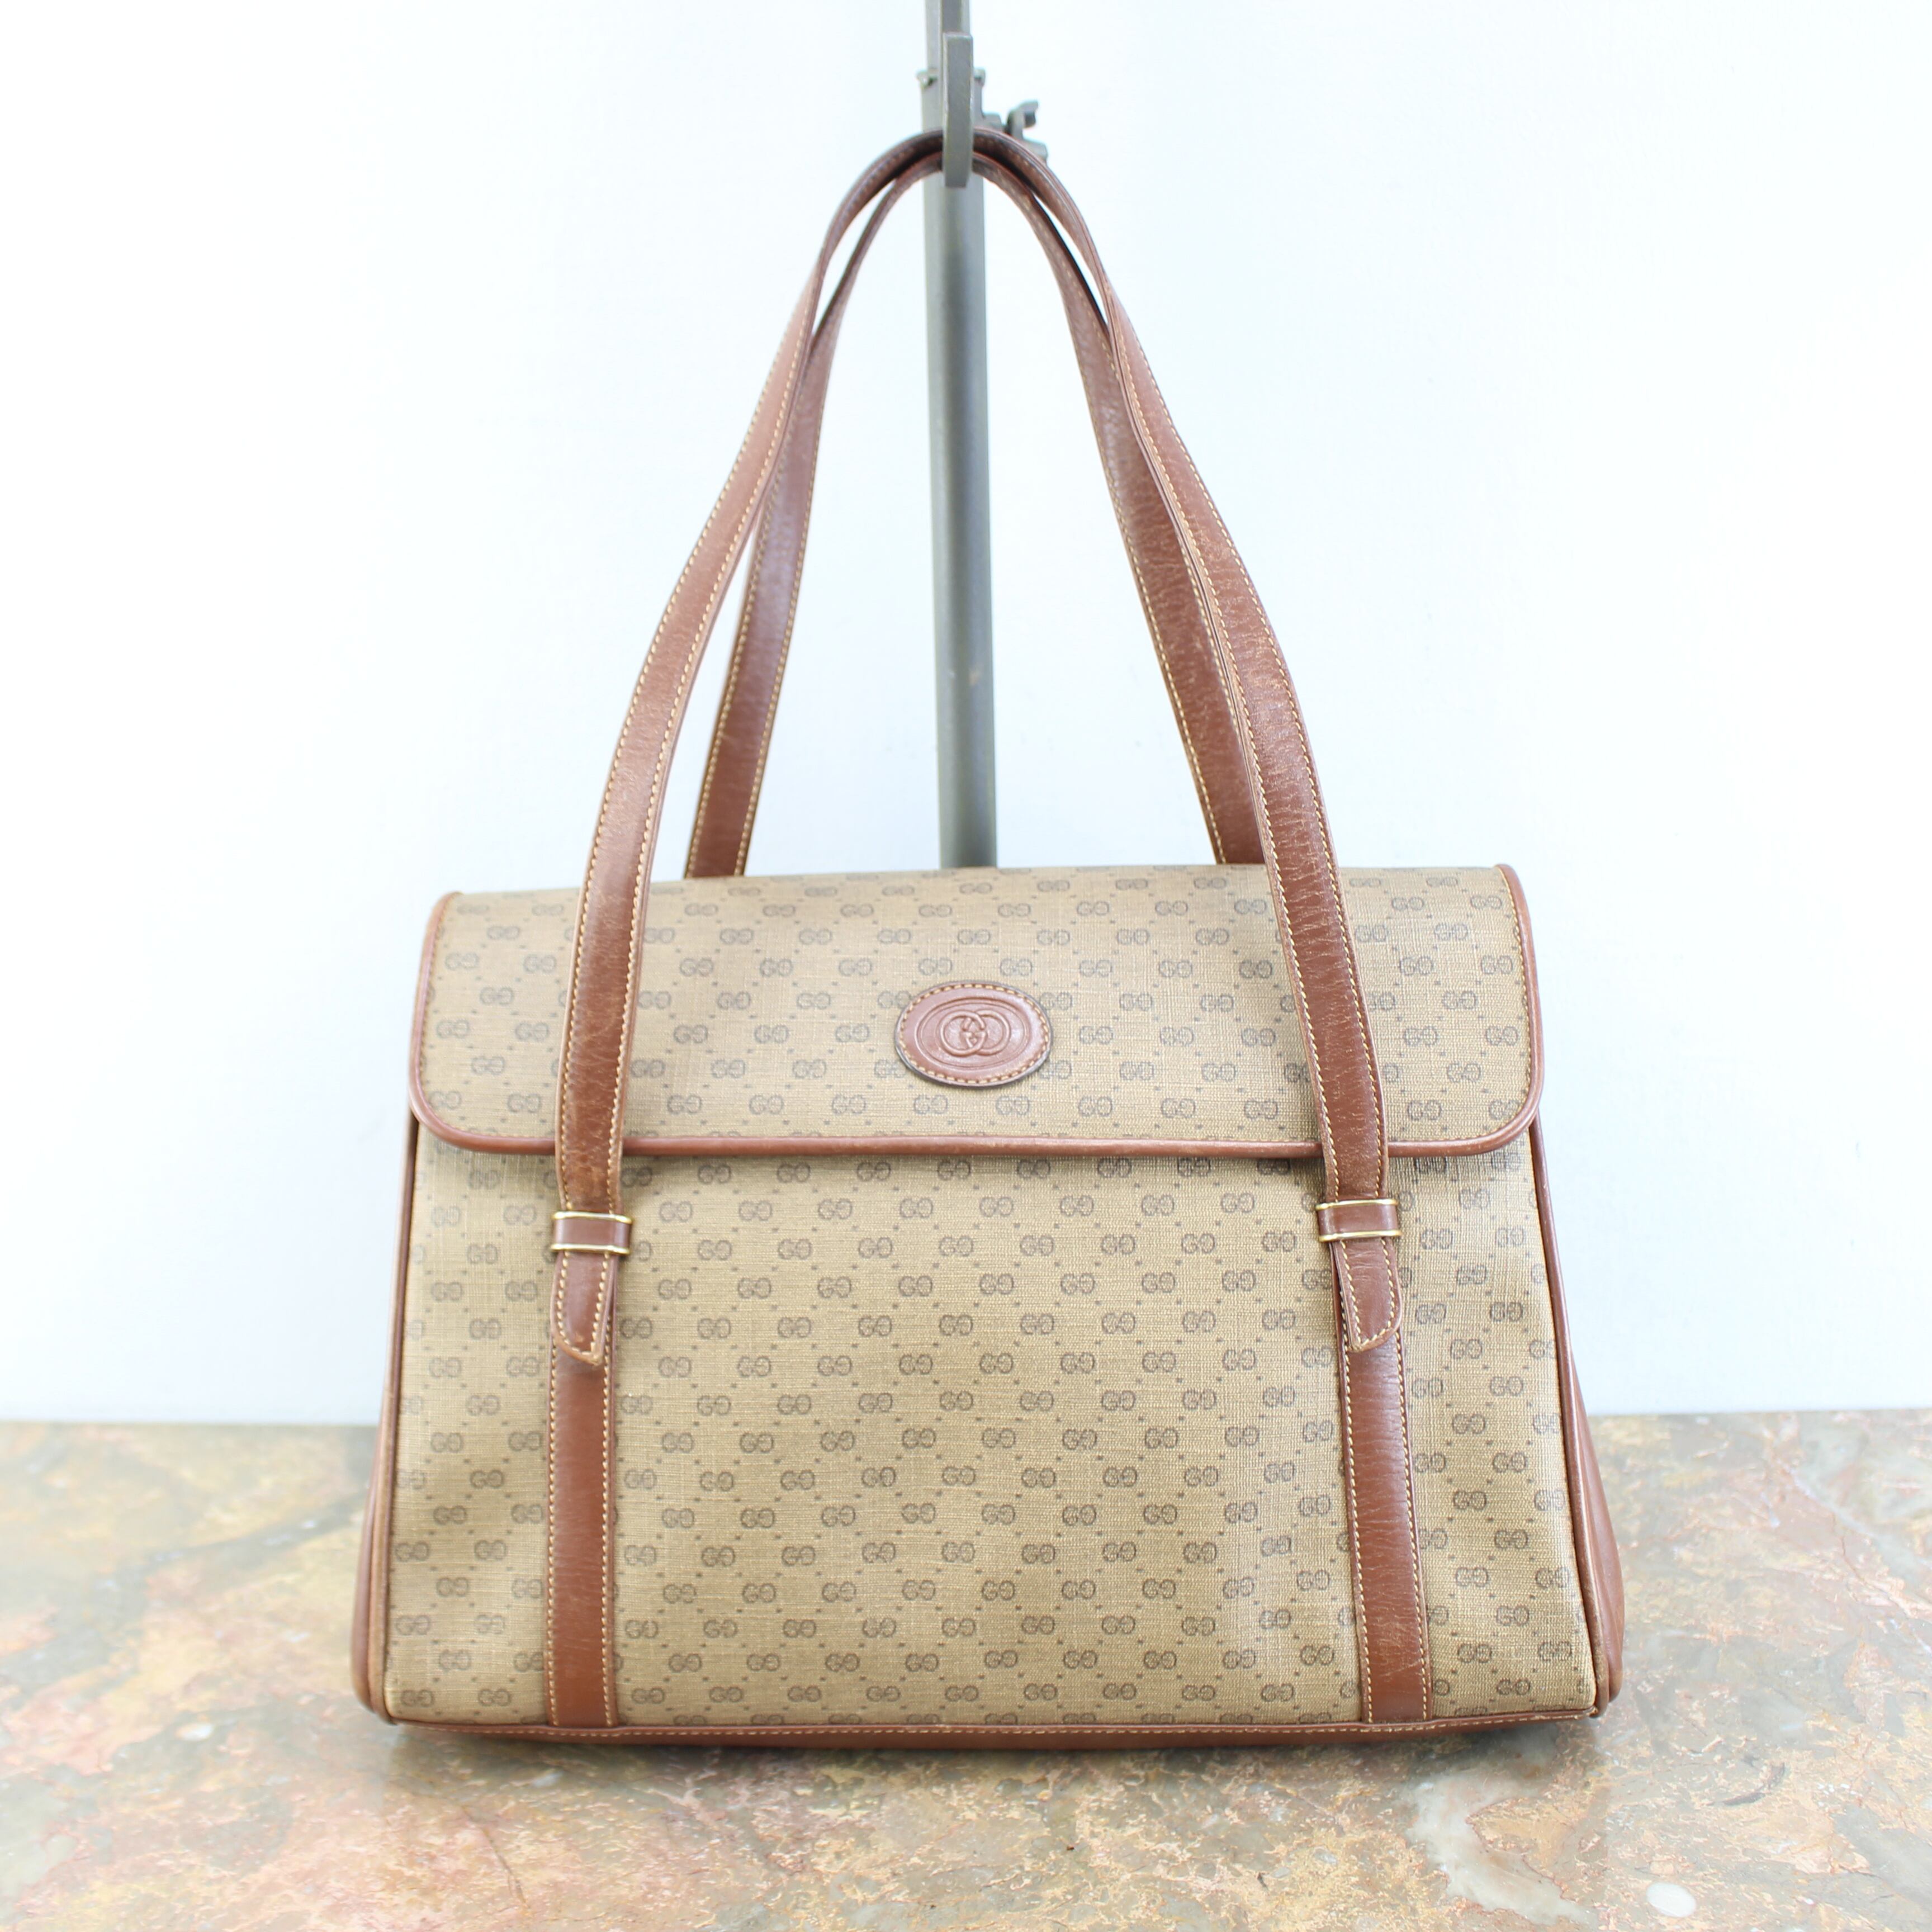 OLD GUCCI LEATHER HAND BAG MADE IN ITALY/オールドグッチレザー